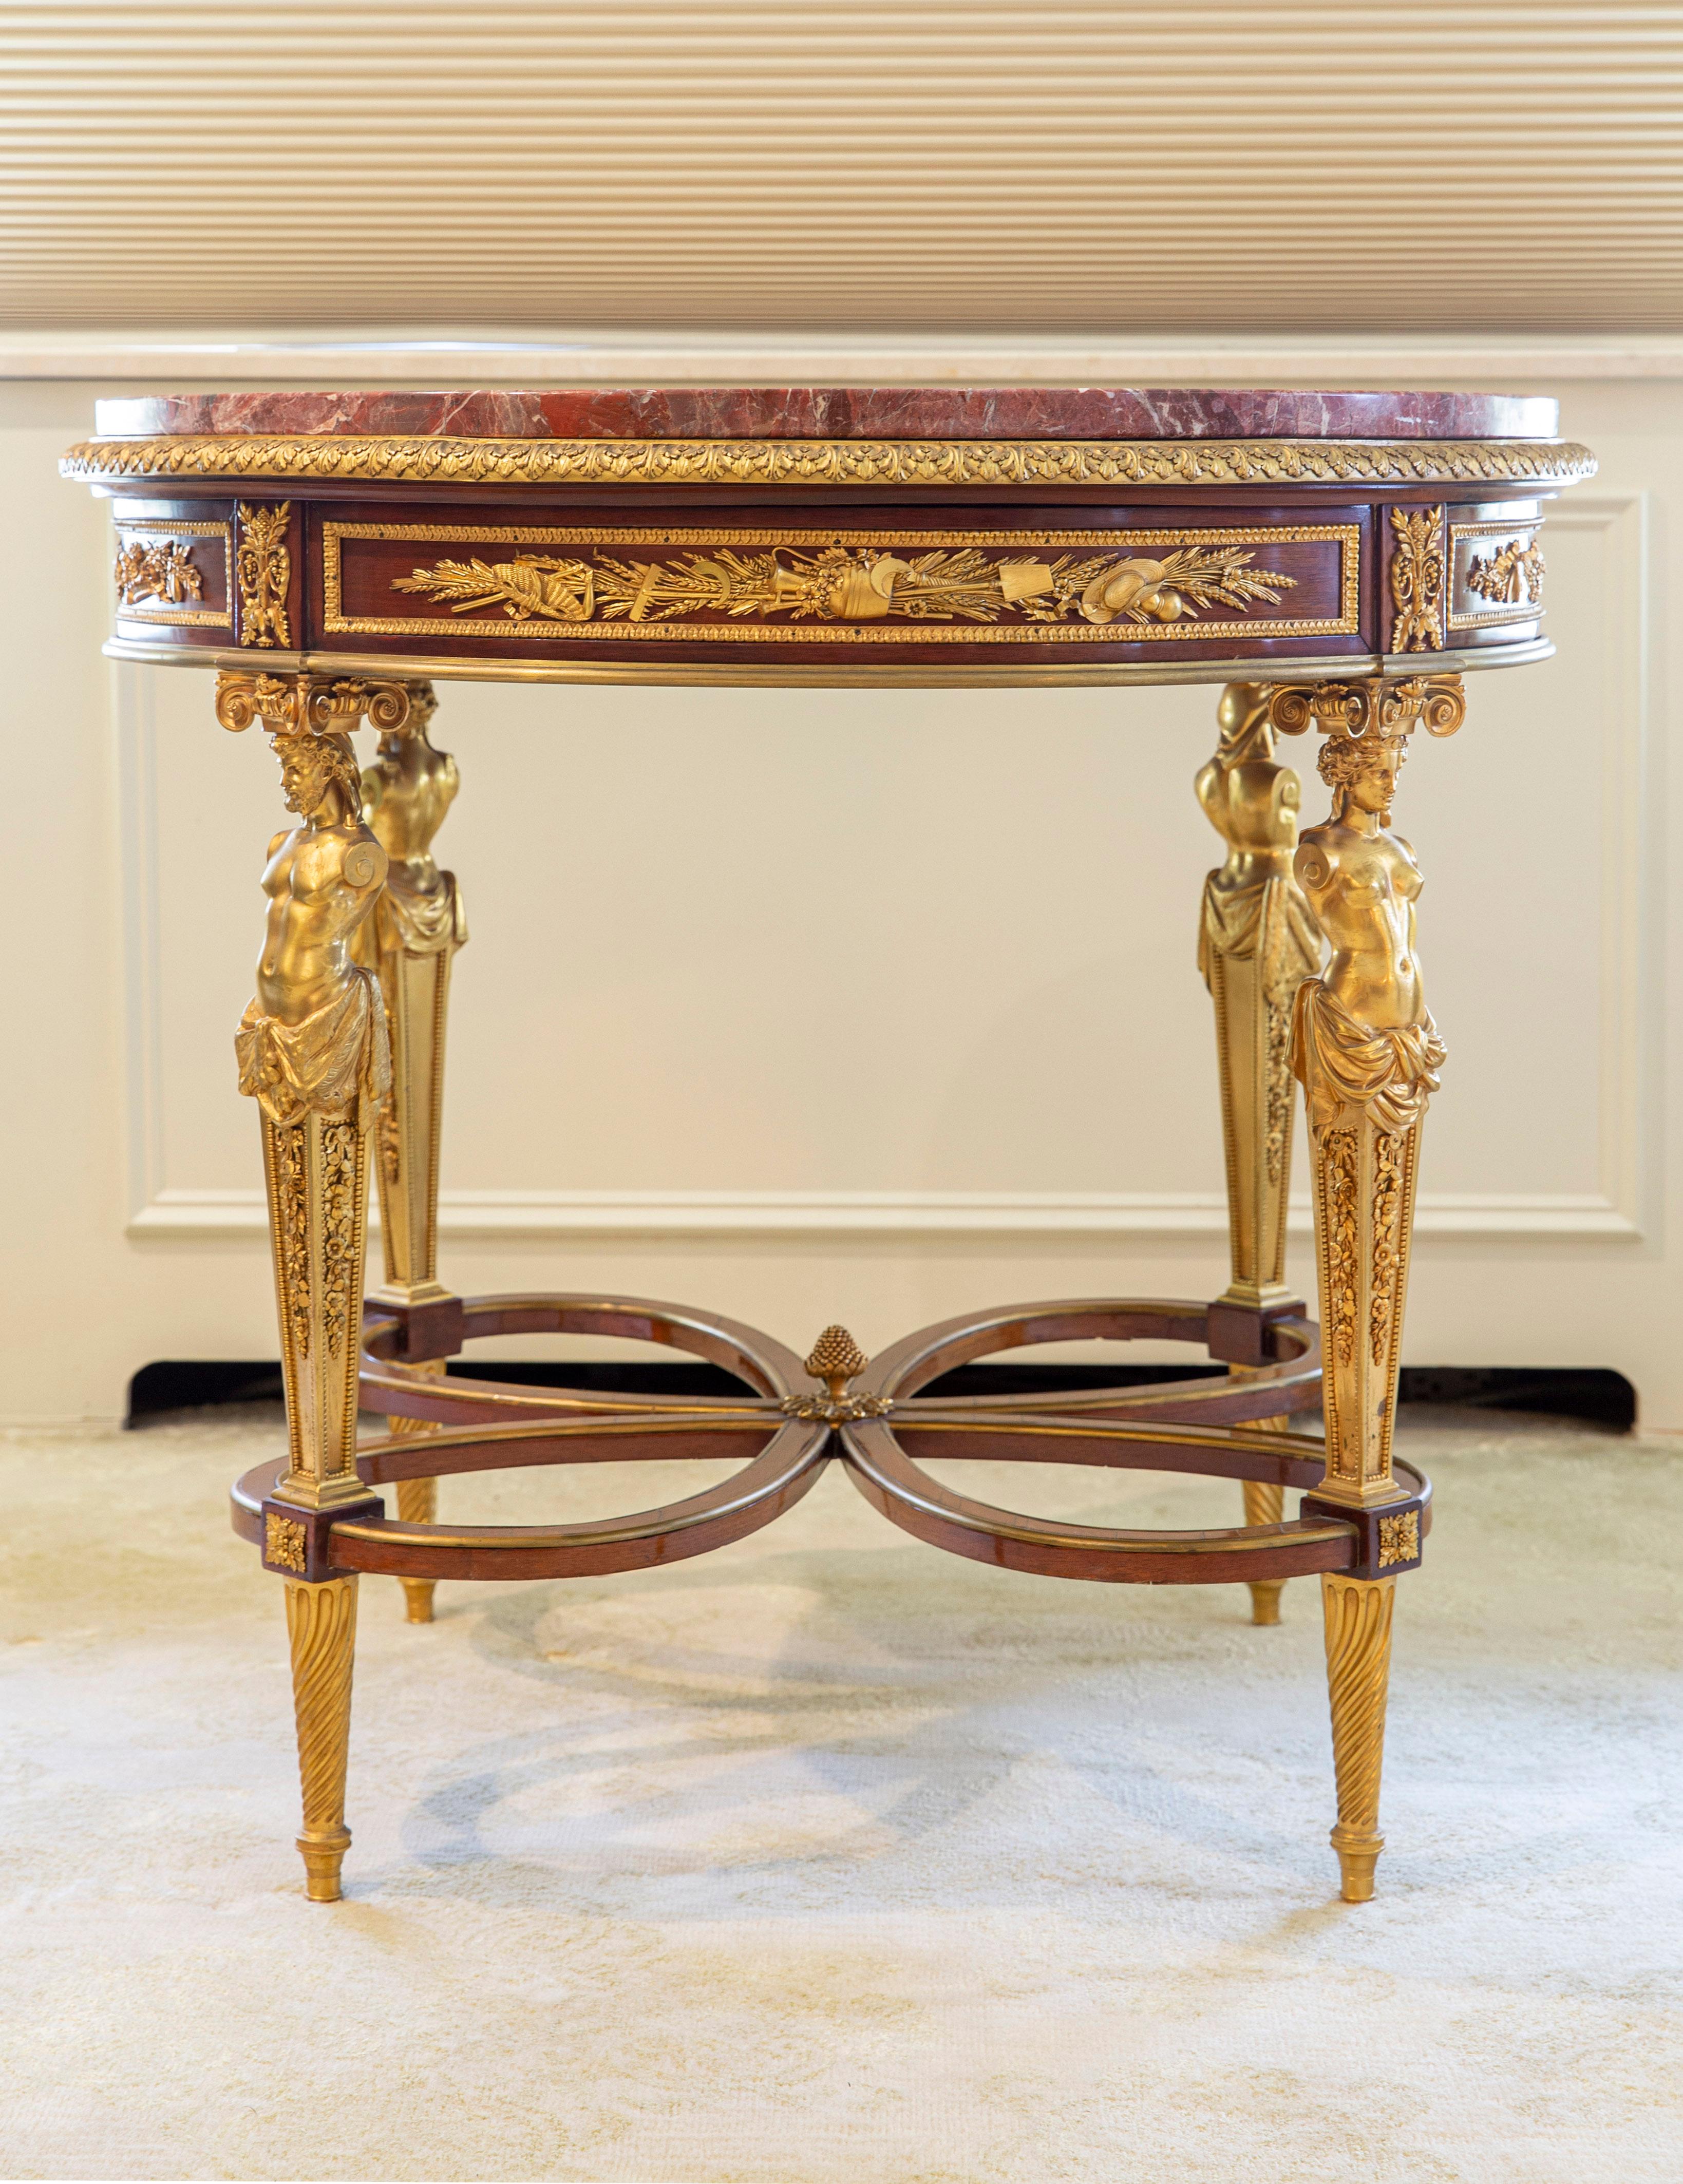 A Very Fine Late 19th Century Louis XVI Style Gilt Bronze Mounted Center Table by Henry Dasson

Henry Dasson

The brèche rouge circular marble top above a frieze mounted with allegorical trophies emblematic of the four seasons amid scrolling foliage